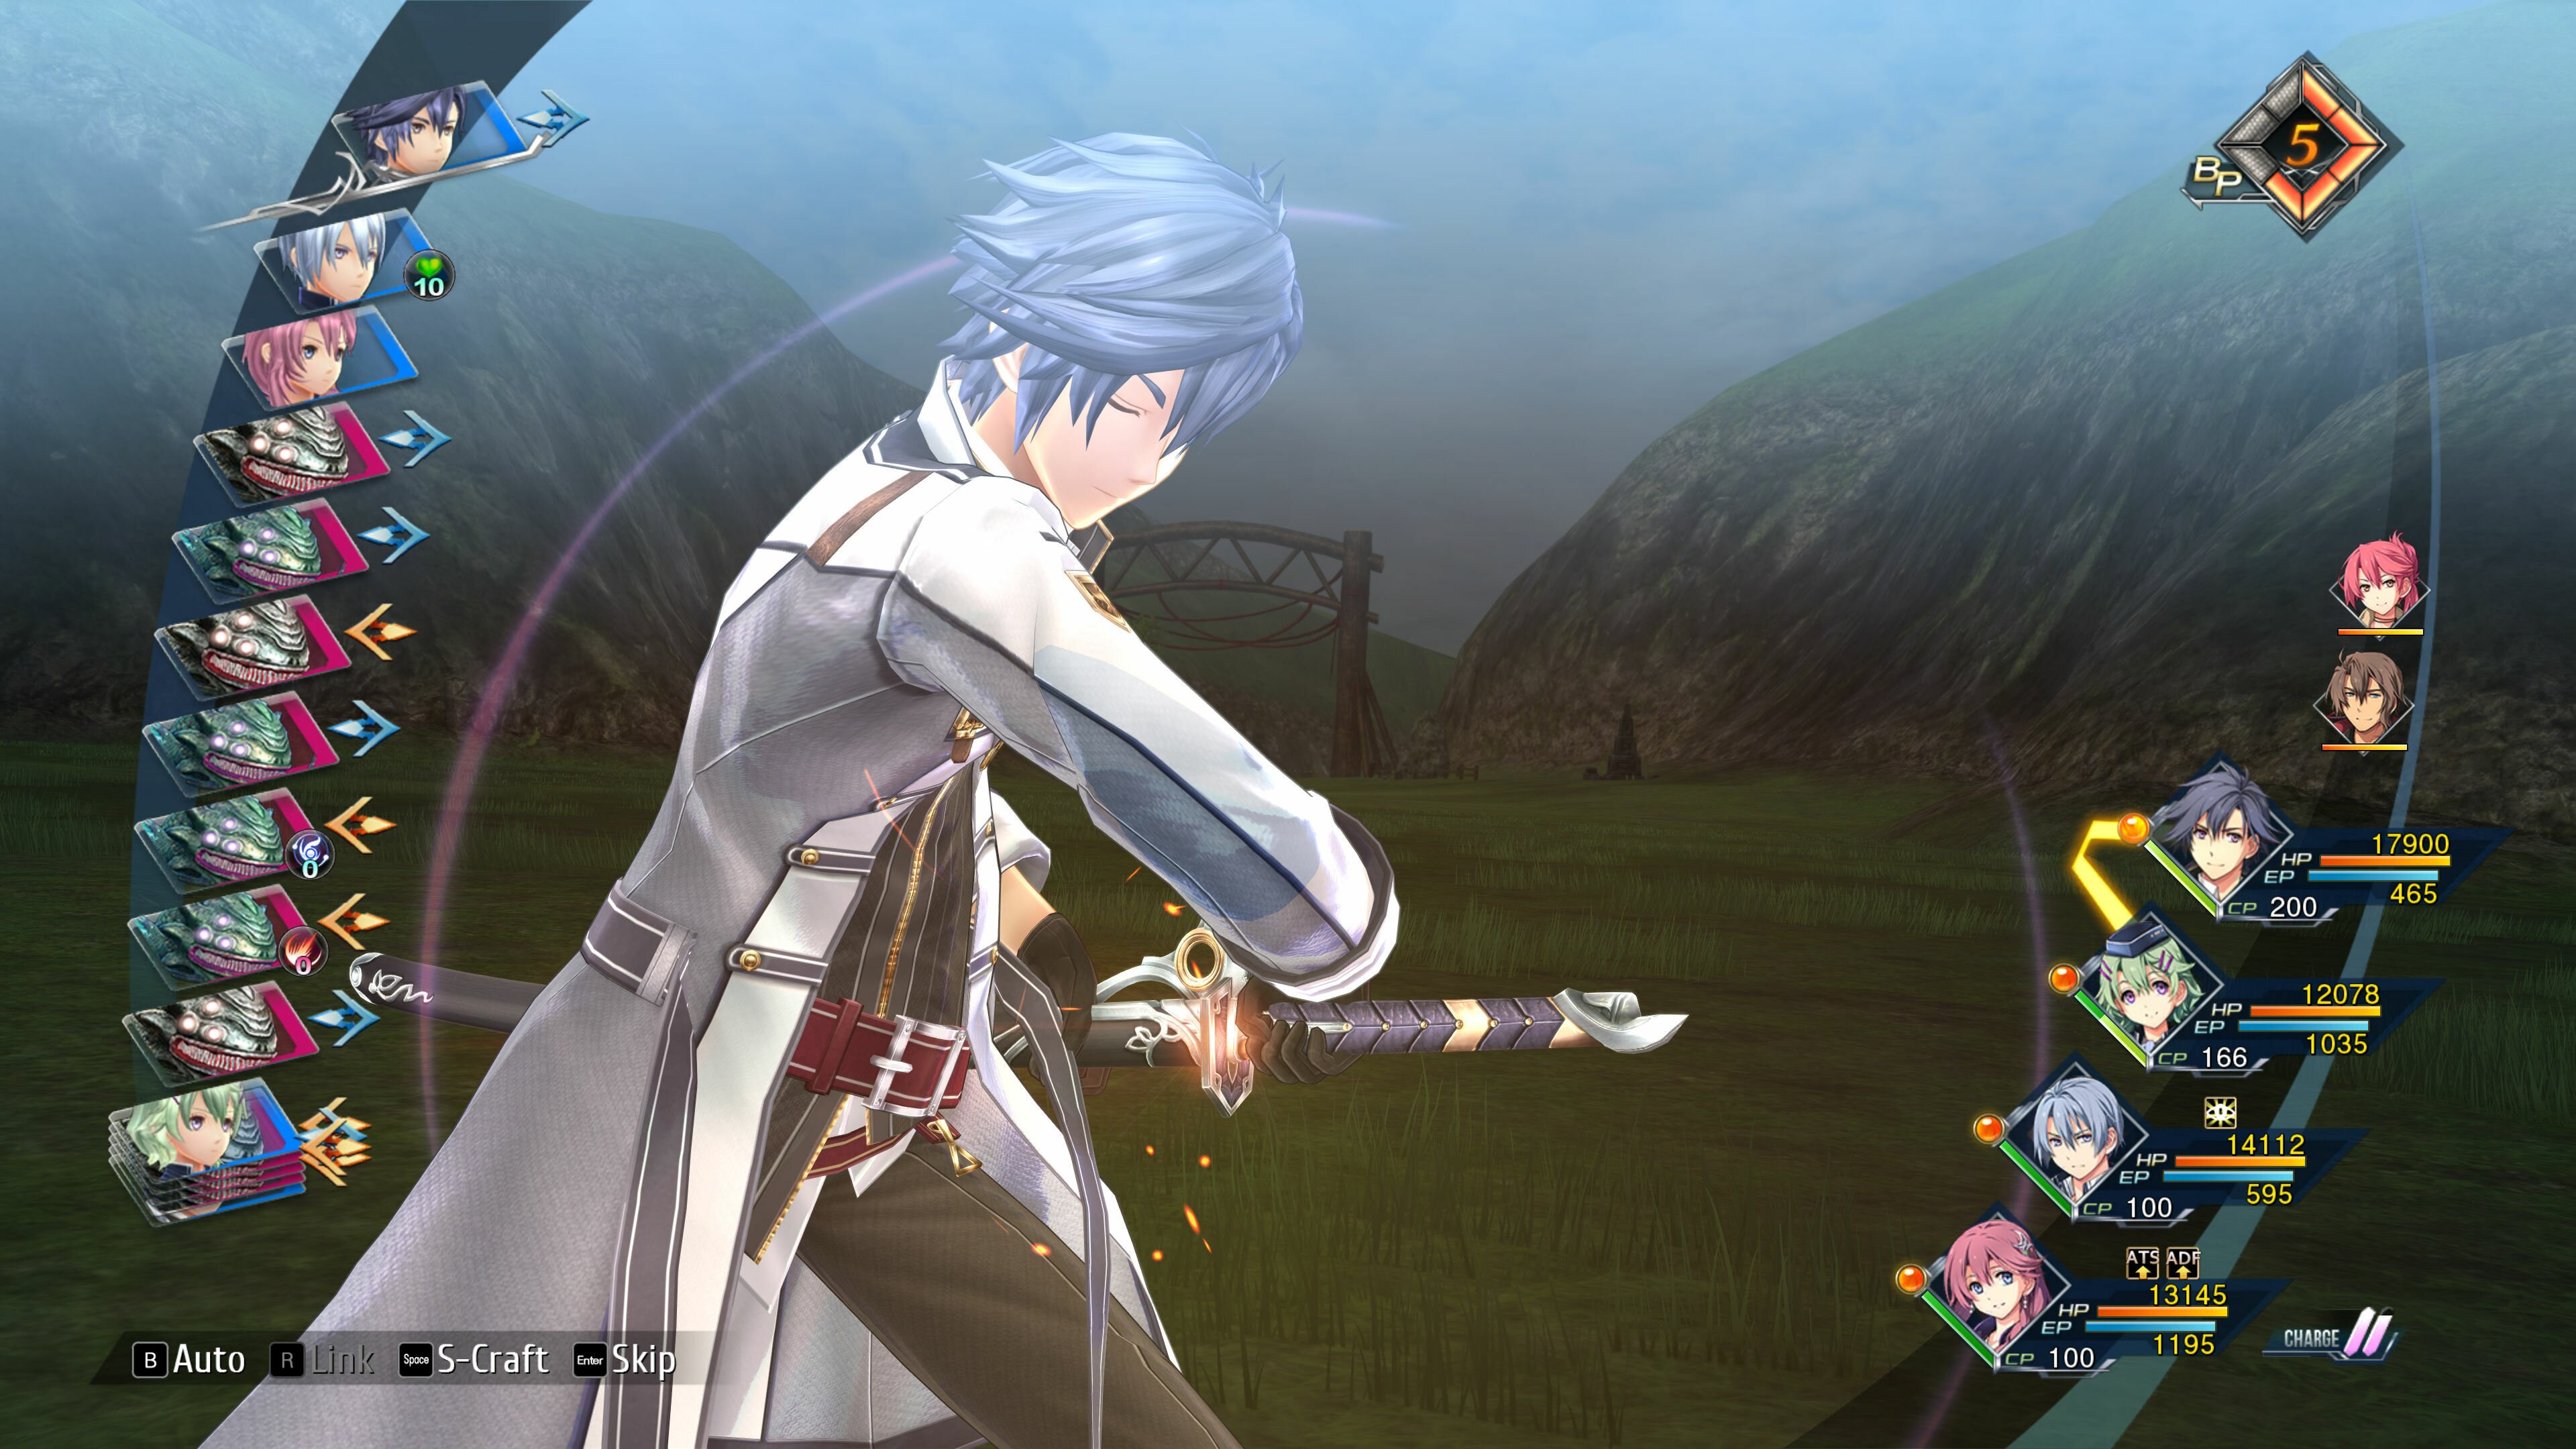 The Legend of Heroes: Trails into Reverie for android download